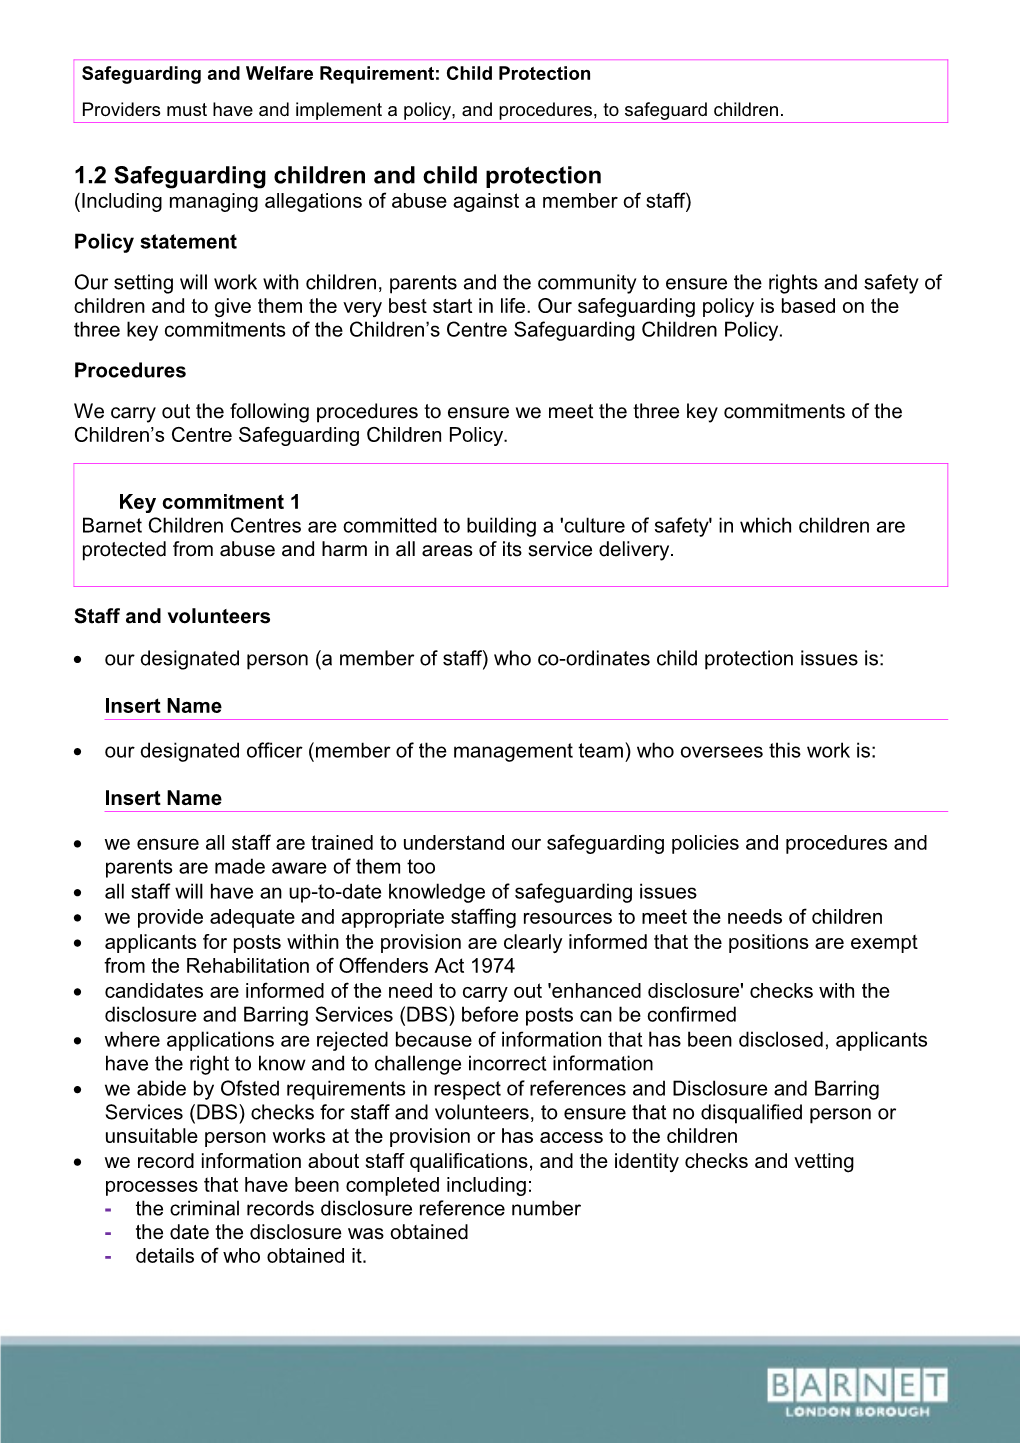 Safeguarding and Welfare Requirement: Child Protection1.2 Safeguarding Children and Child